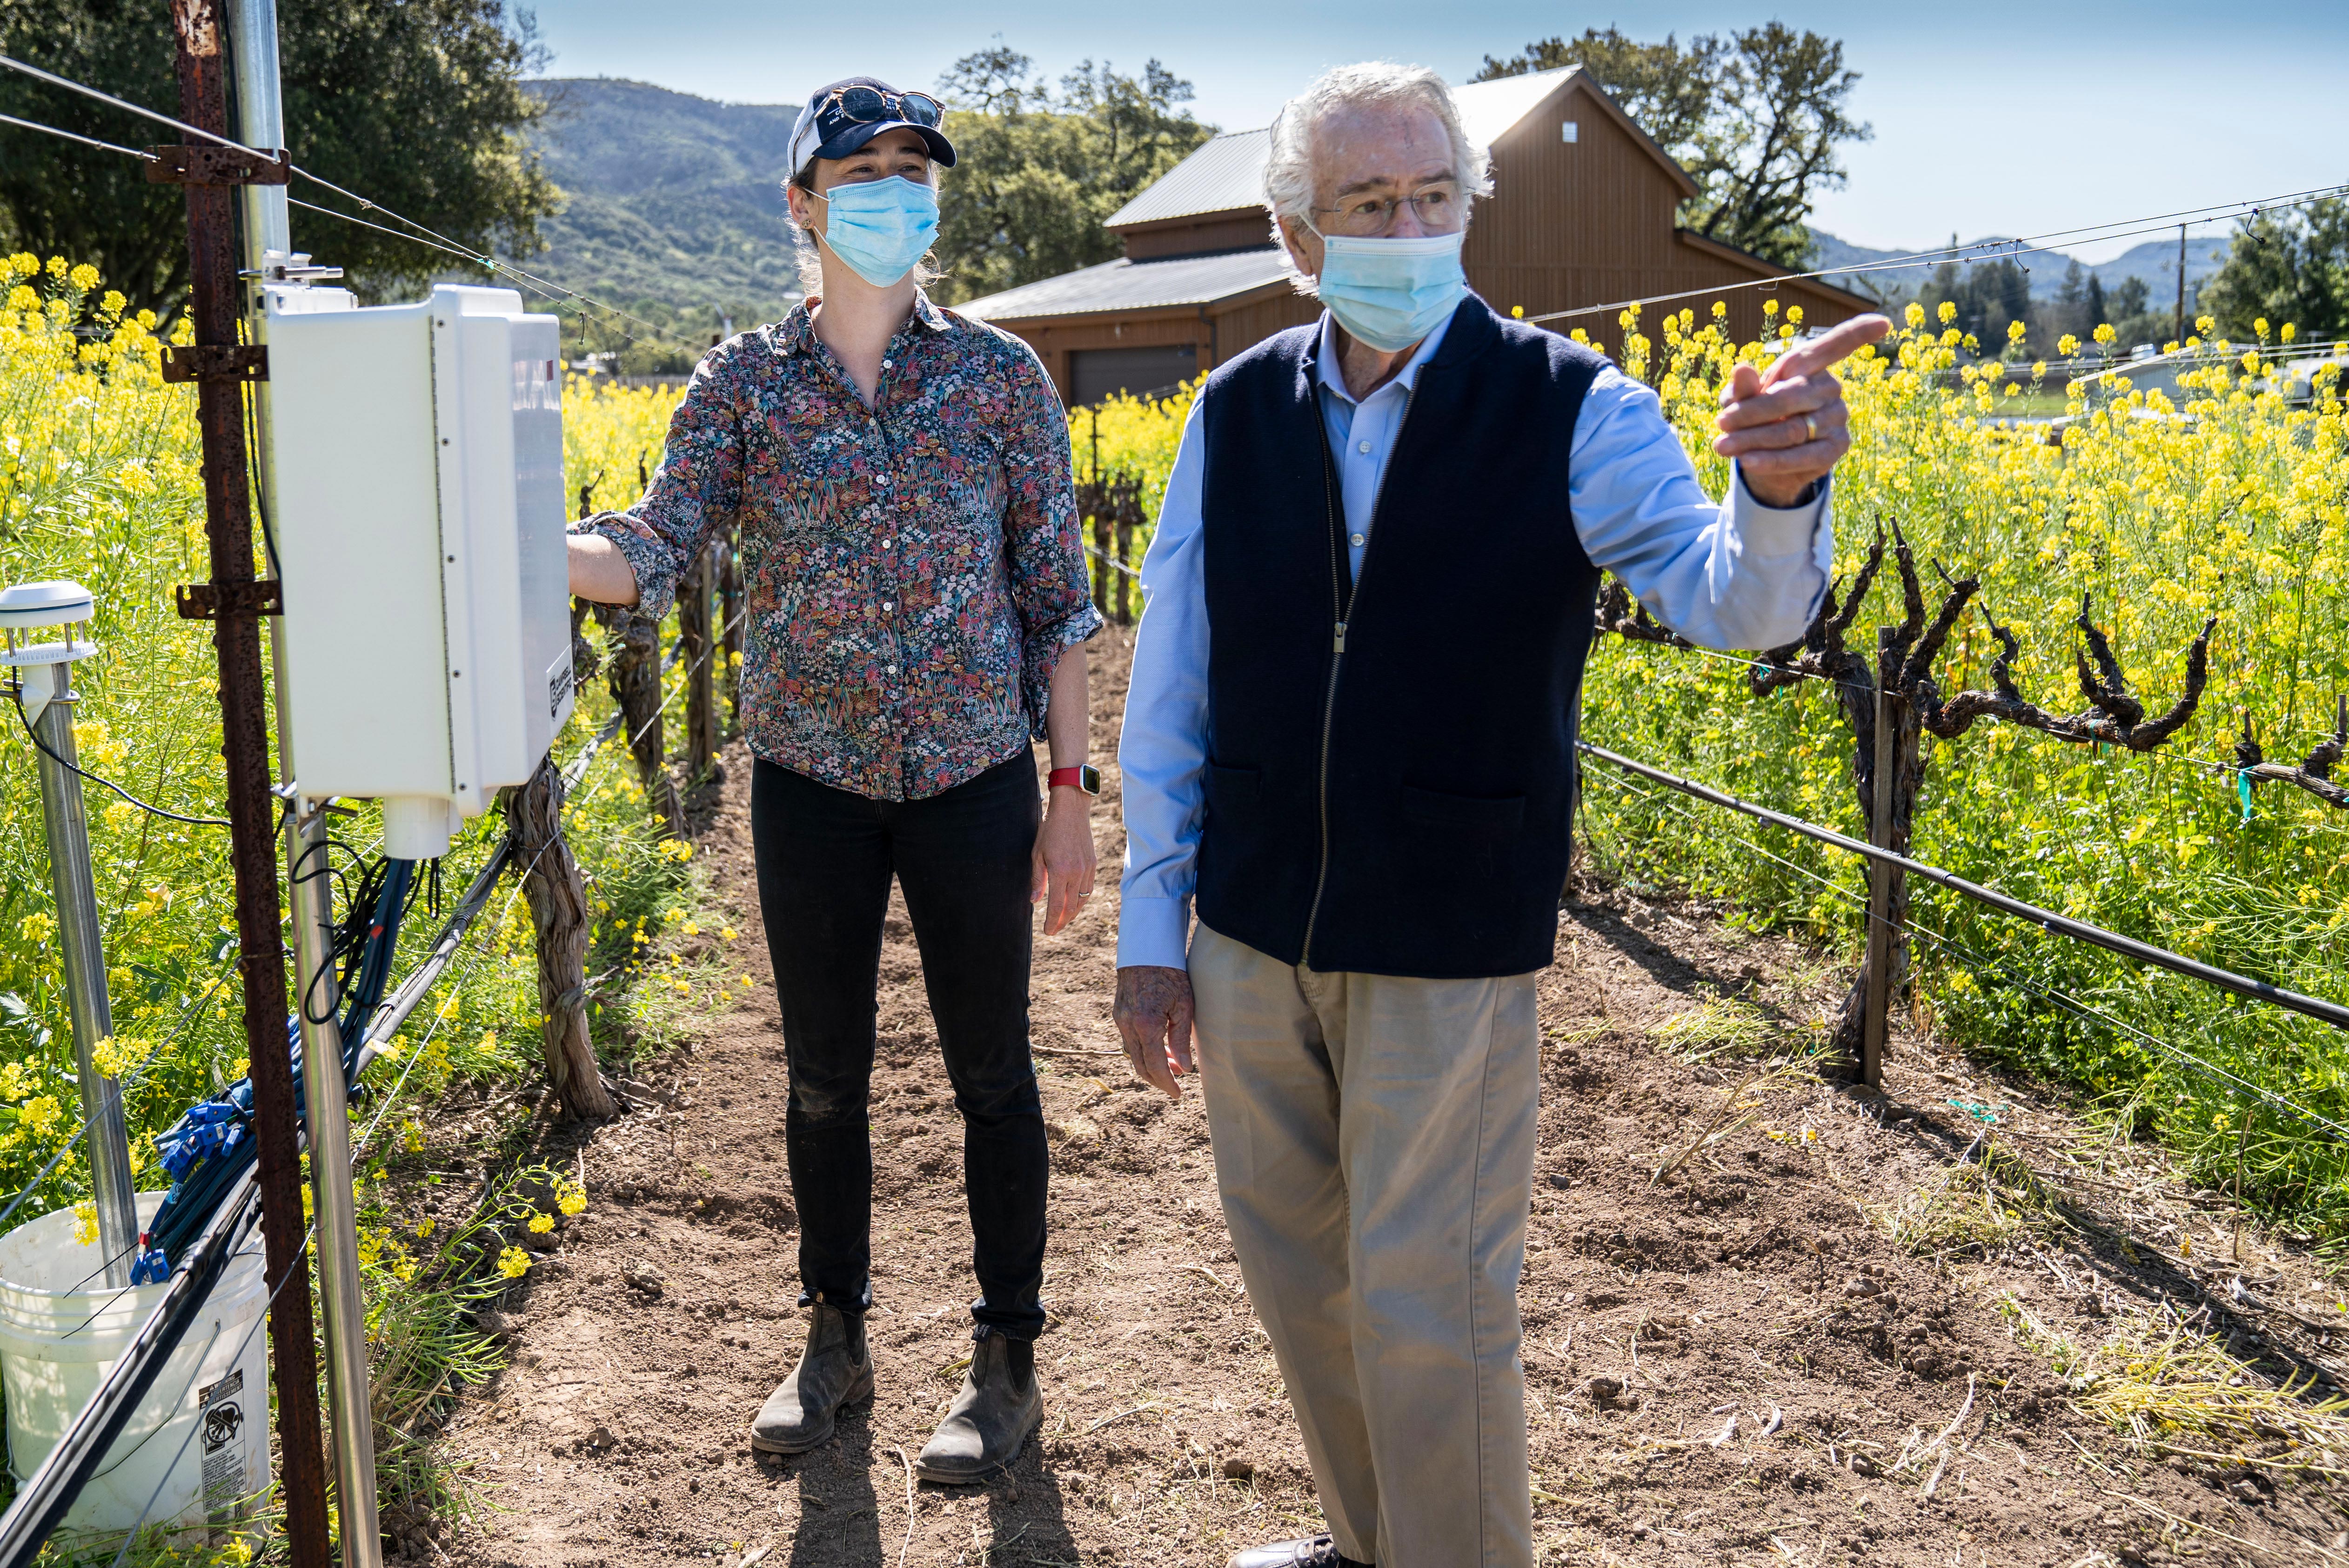 Beth Forrestel, an assistant professor in the Department of Viticulture and Enology, talks with winemaker Warren Winiarski in his vineyard.